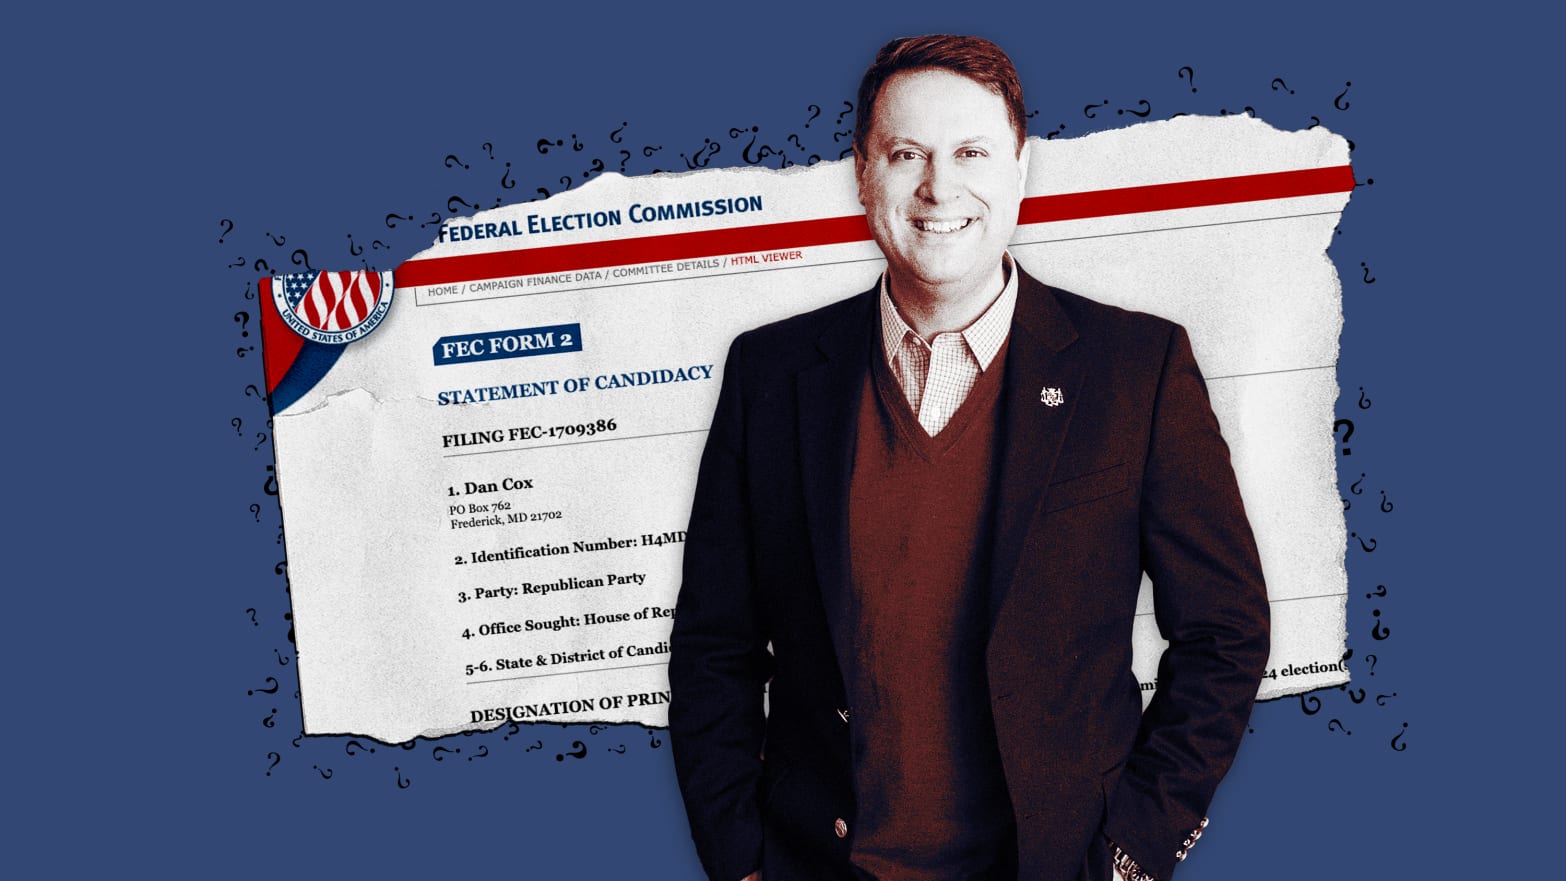 A photo illustration of former Maryland Republican gubernatorial candidate Dan Cox superimposed over FEC paperwork to enter into the 6th District Congressional race.